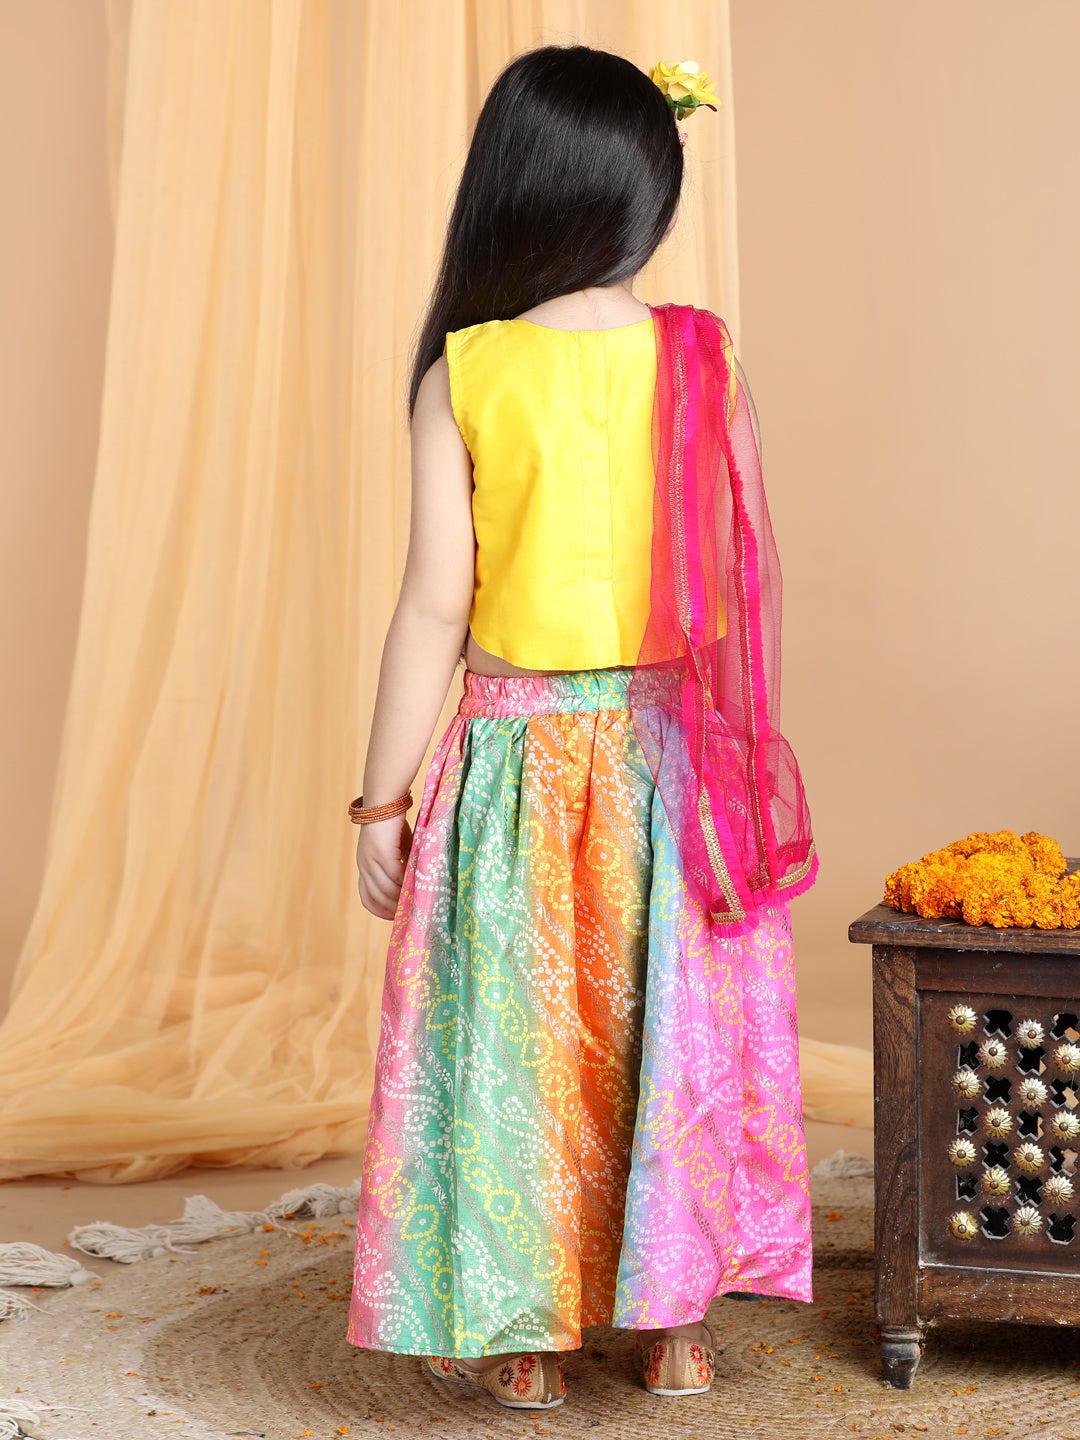 Yellow Top with multi color gold printed lehenga and dupatta